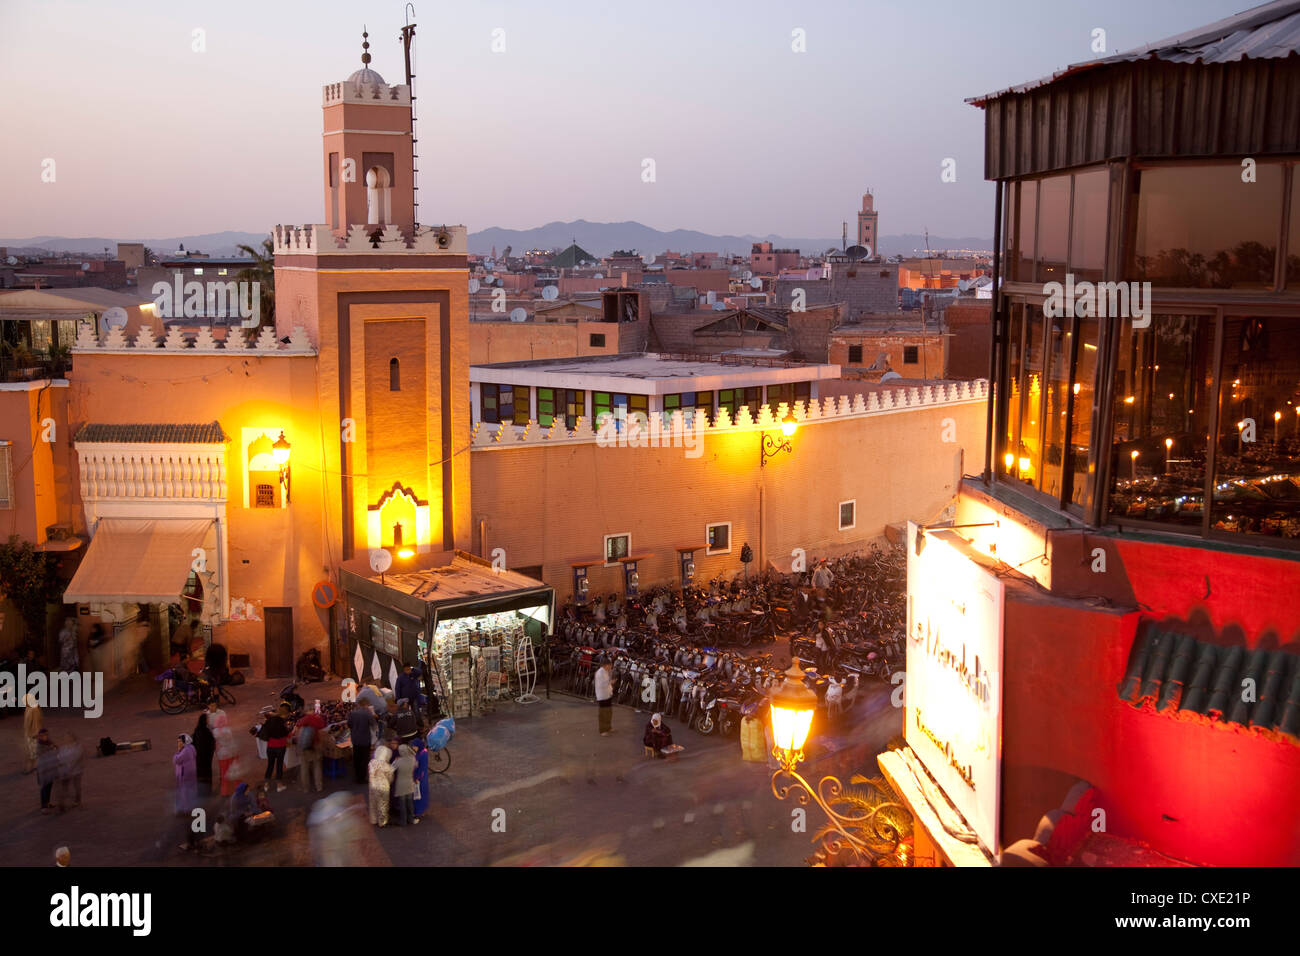 Mosque at dusk, Place Jemaa El Fna, Marrakesh, Morocco, North Africa, Africa Stock Photo